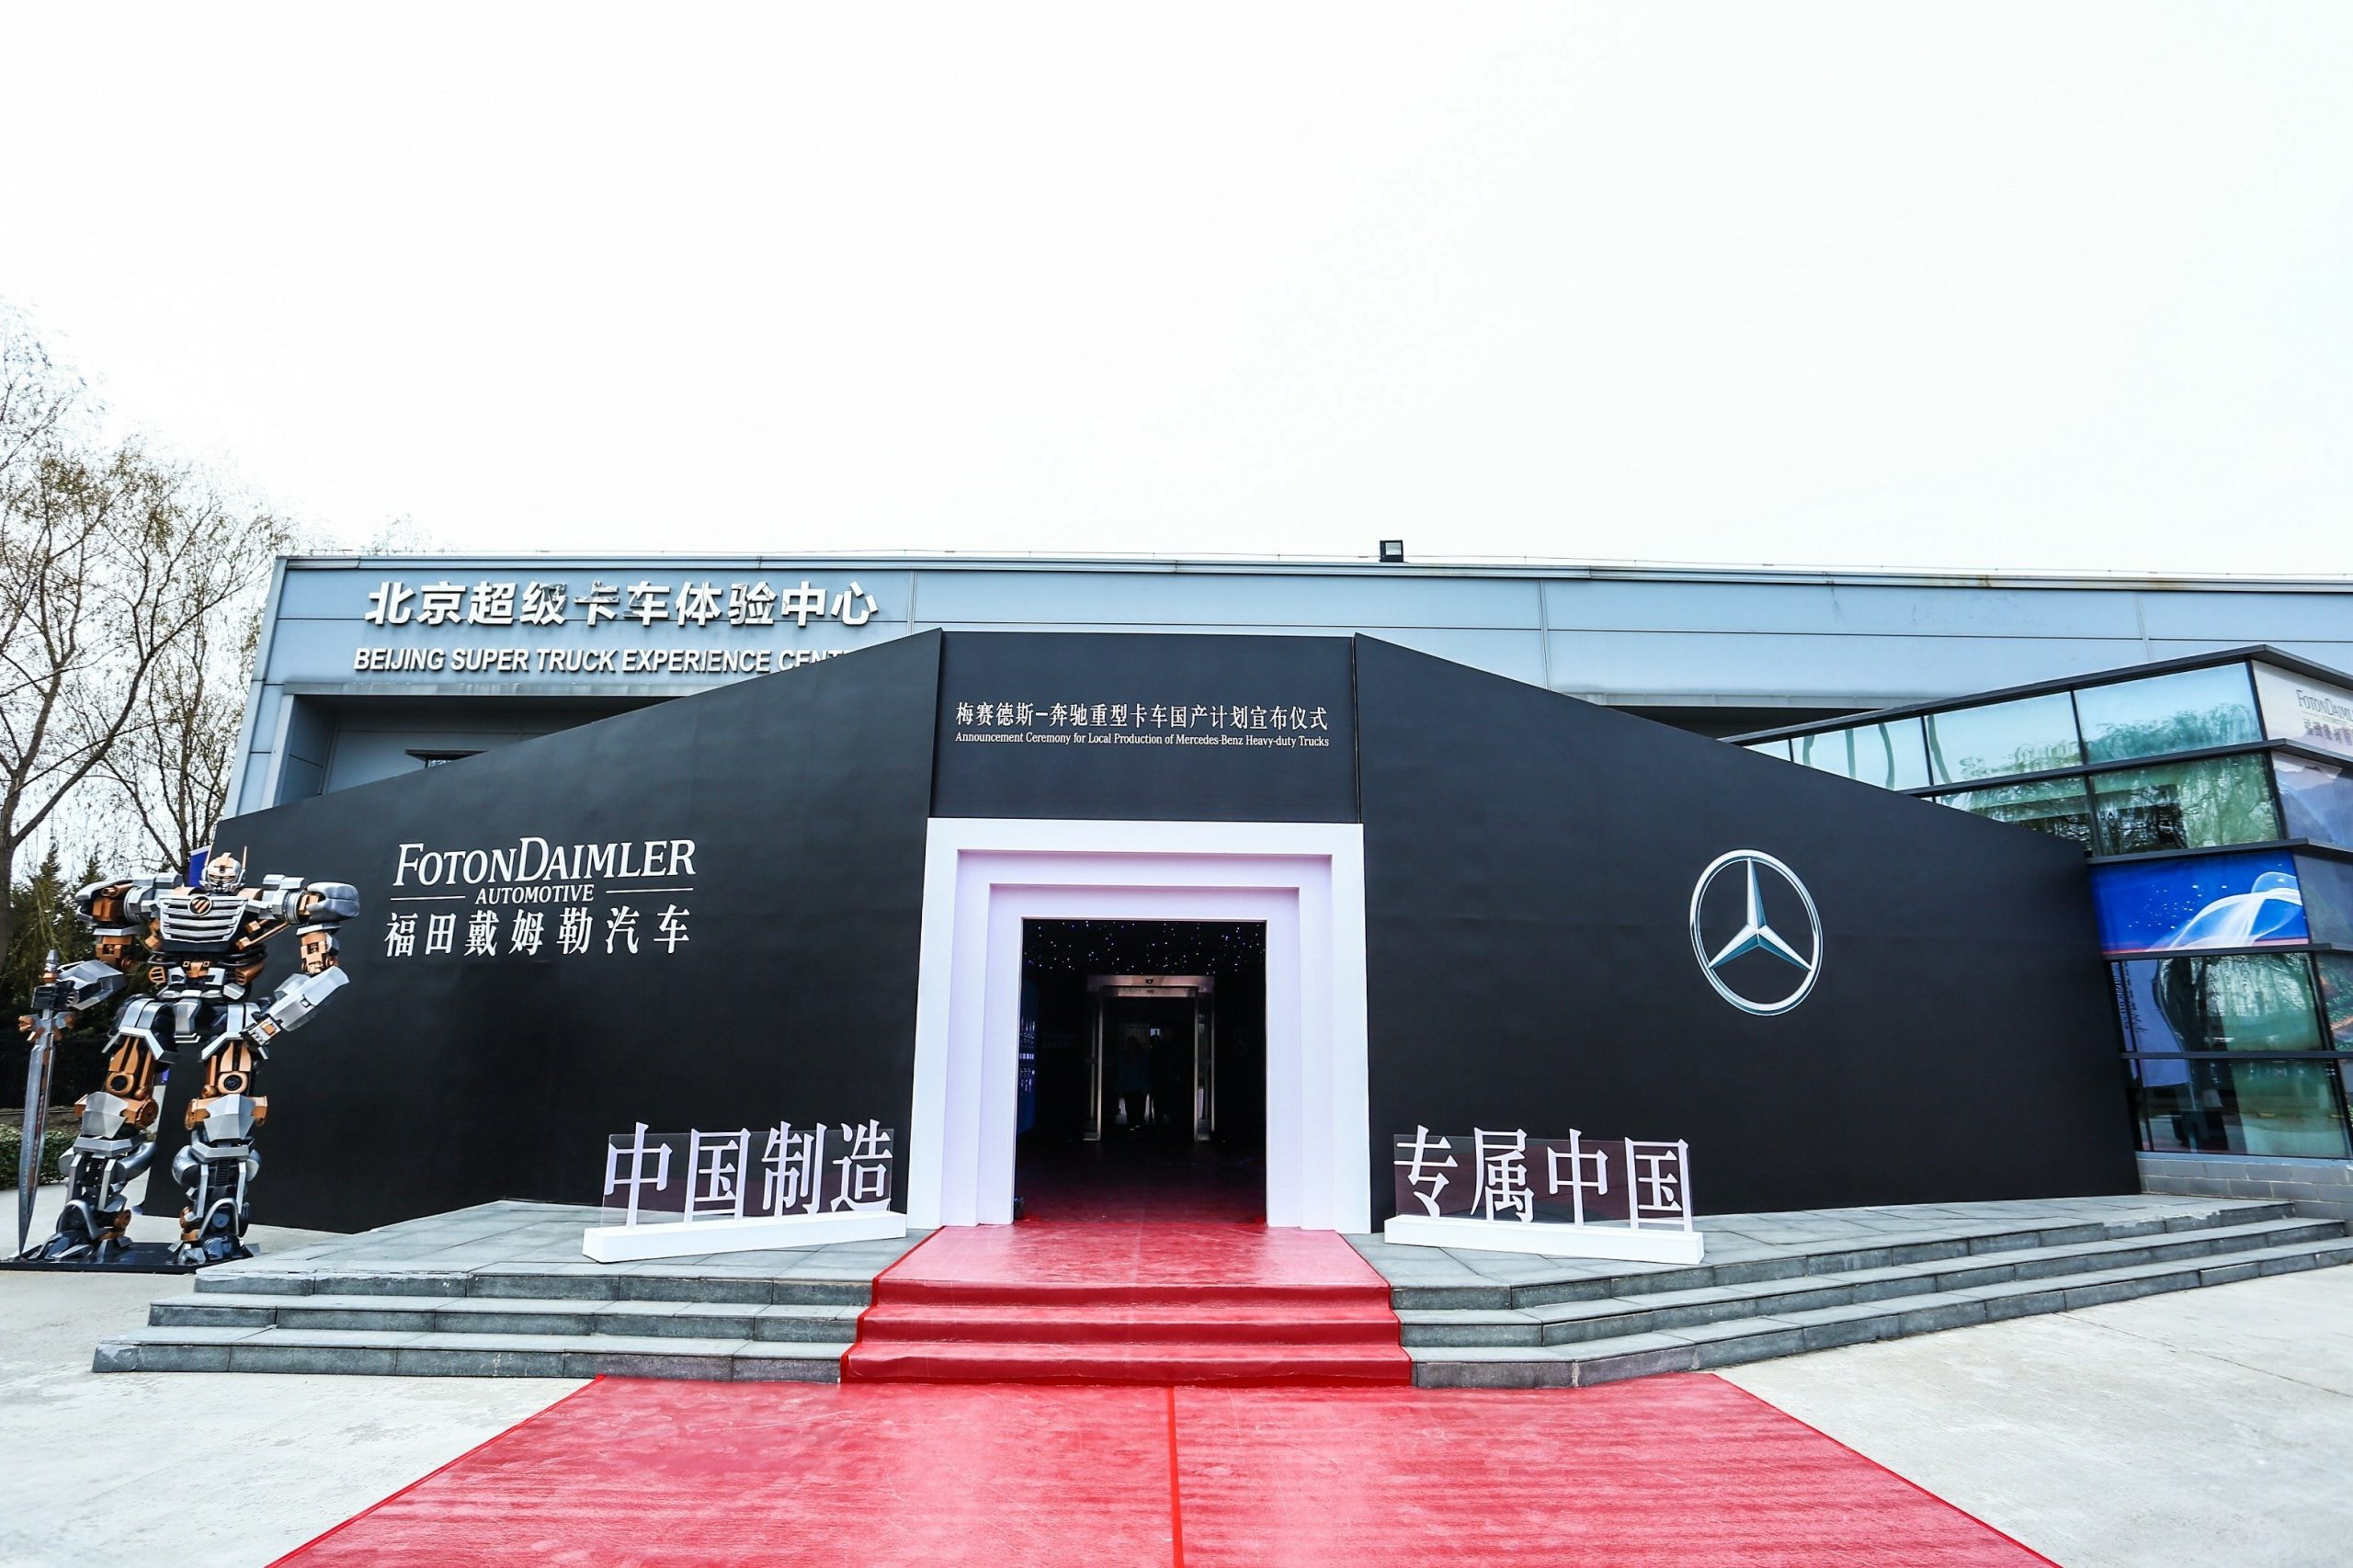 Business in China drove Daimler's profits to unimagined heights